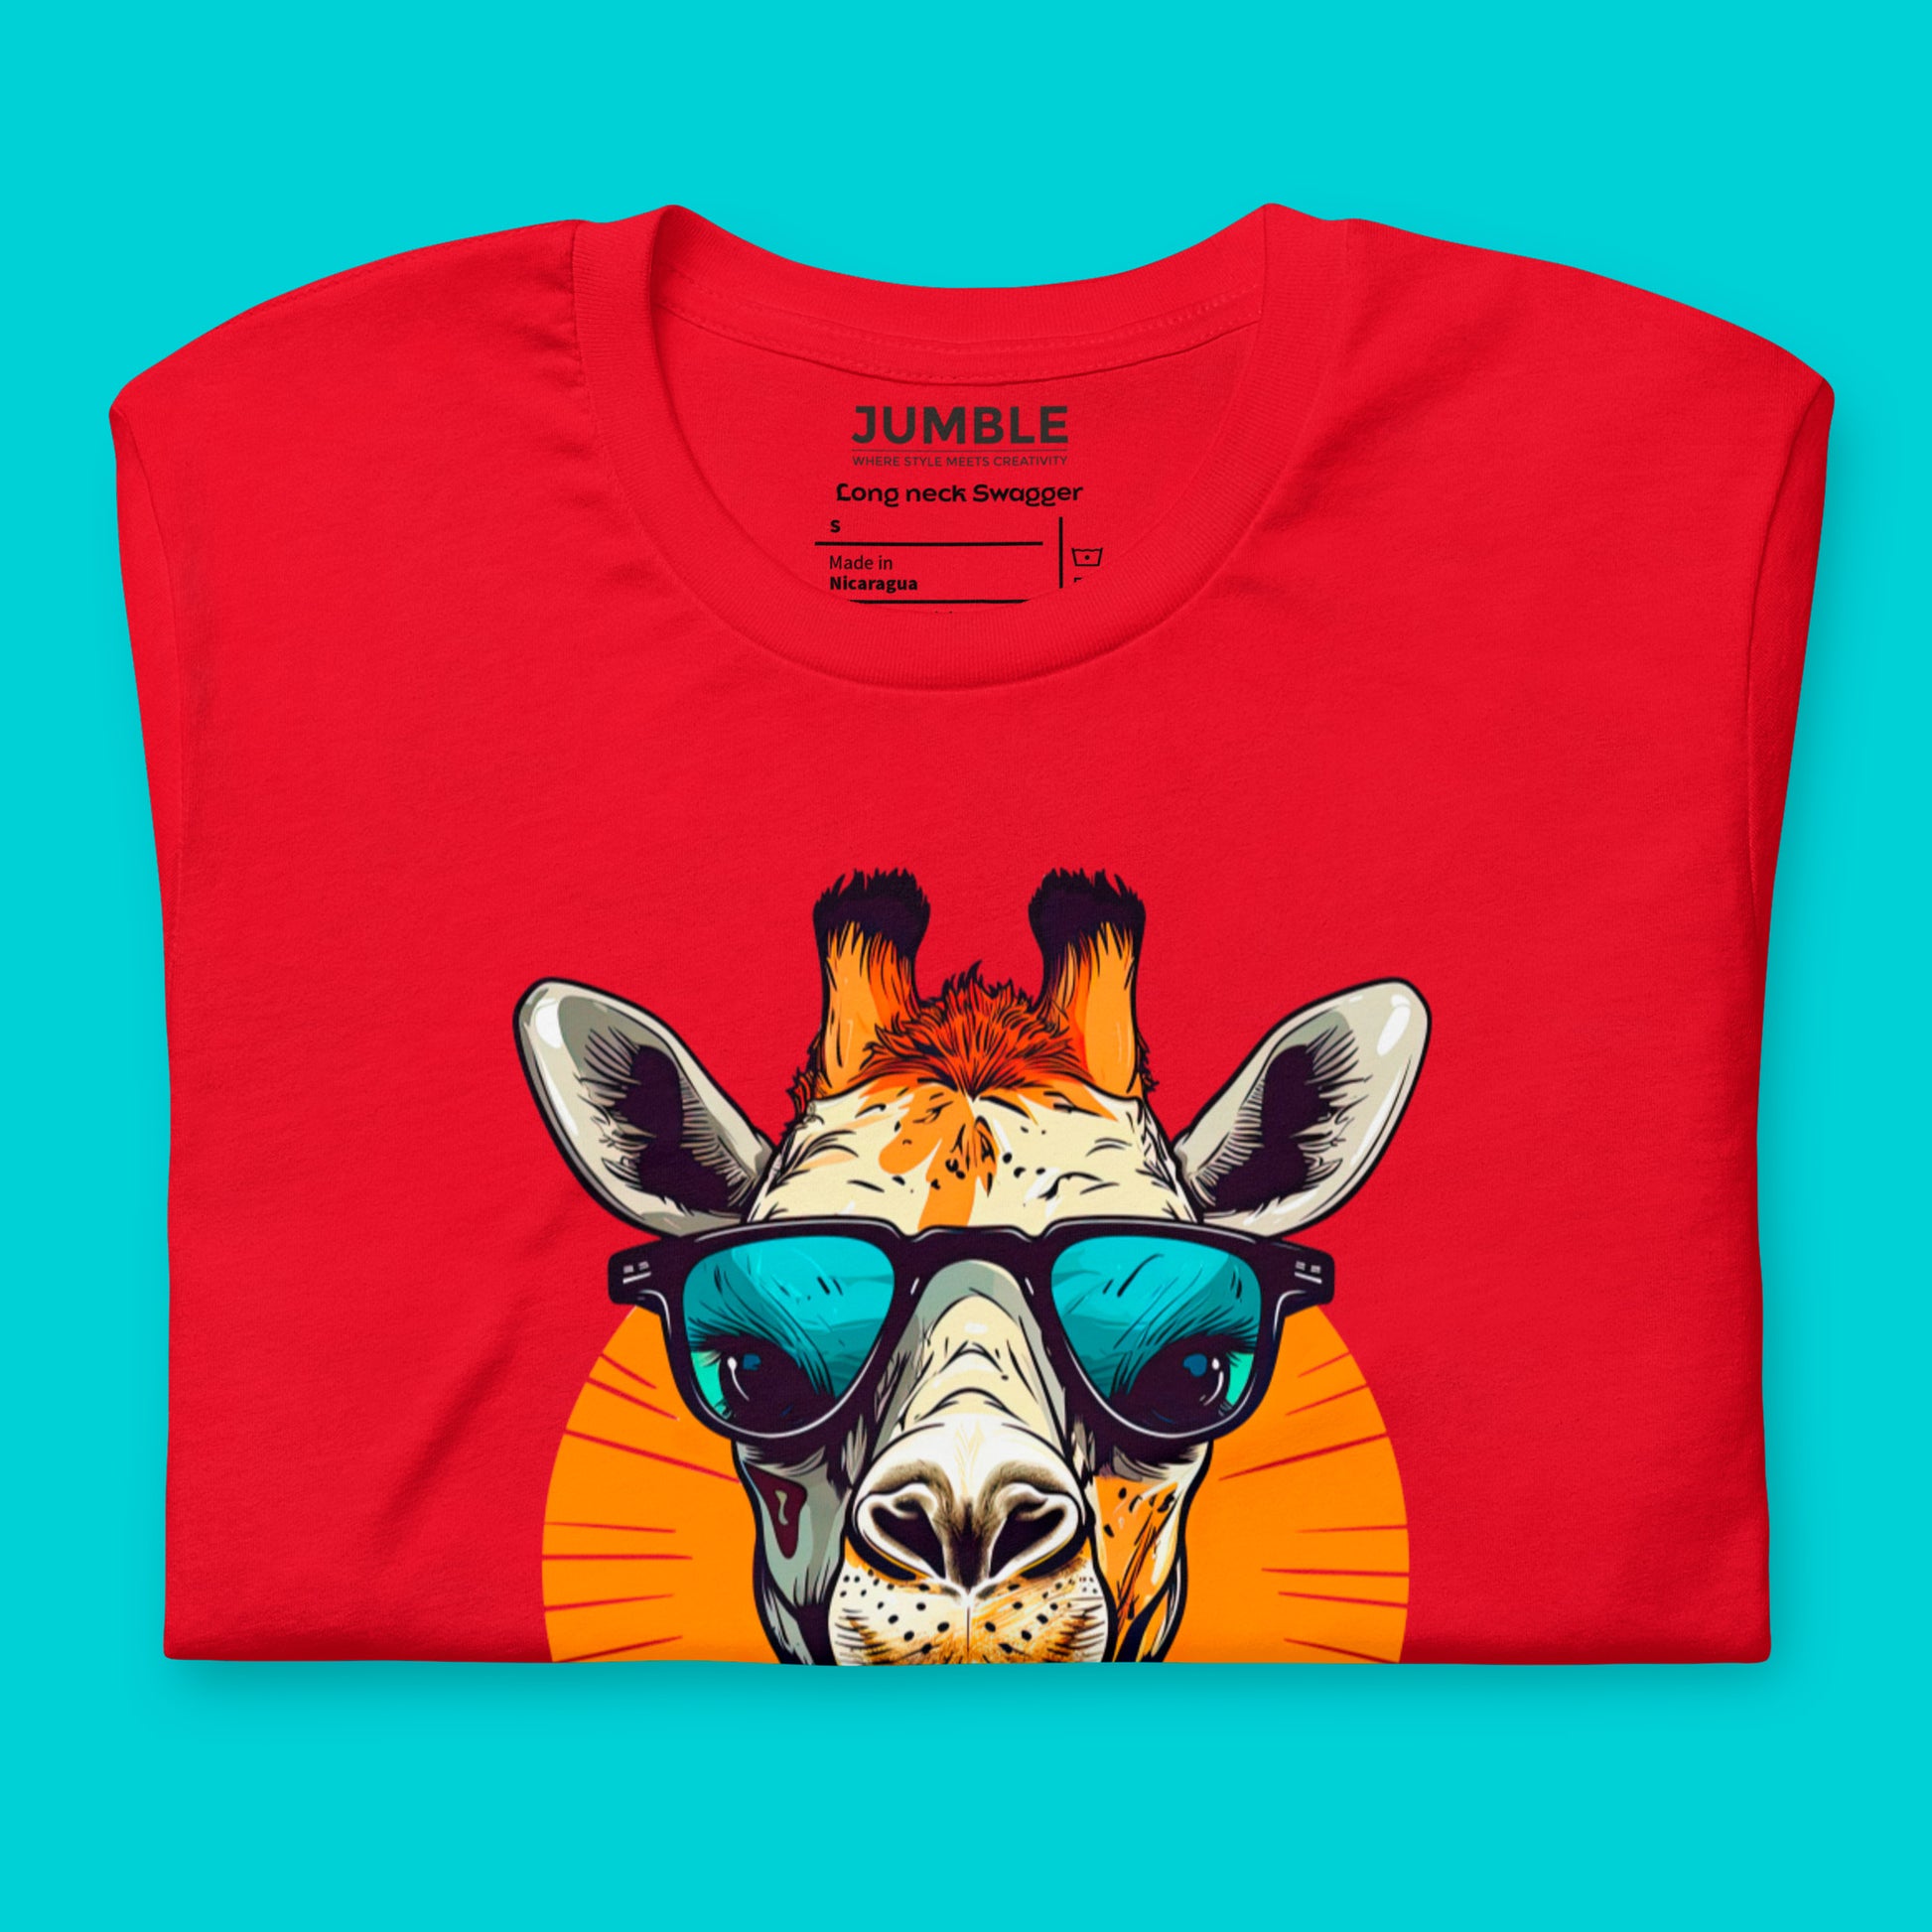 close up folded red Long Neck Swagger Unisex t-shirt